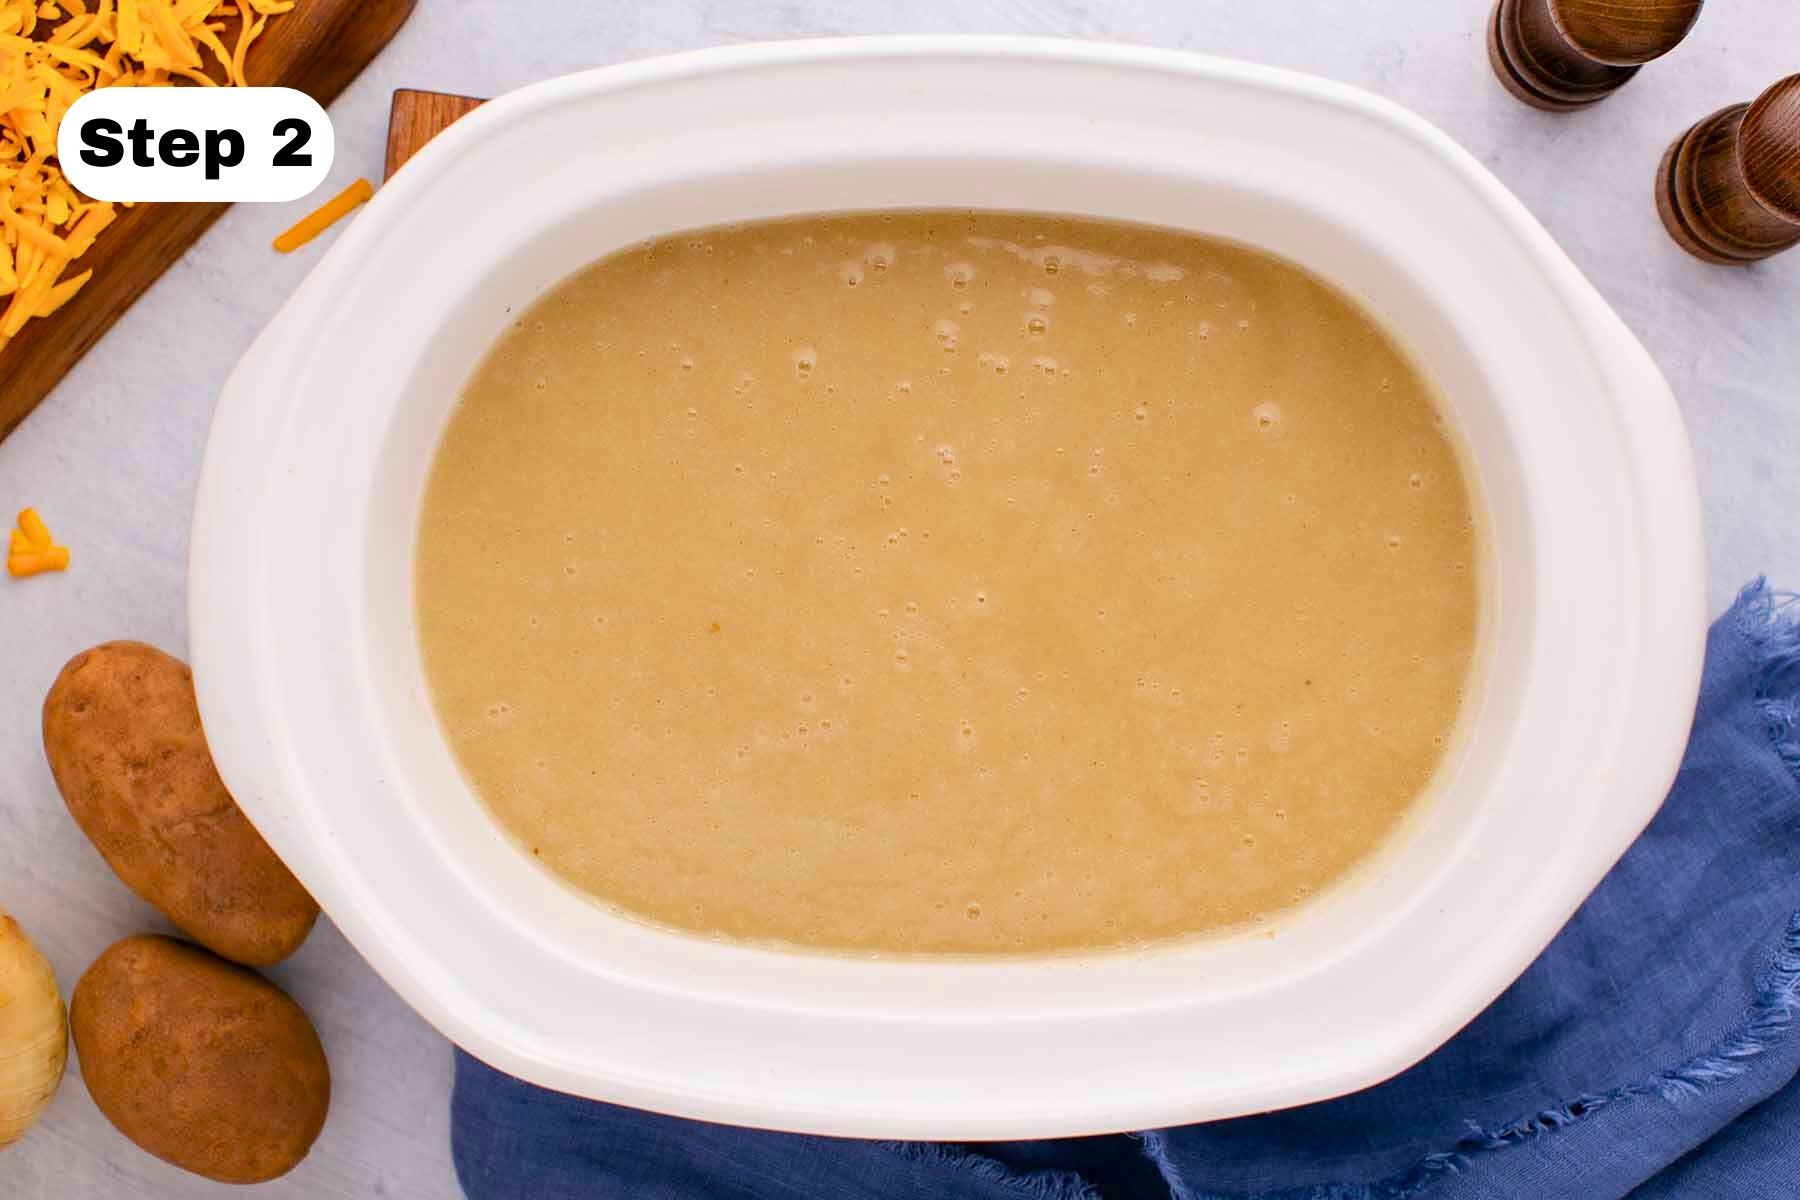 Blended cooked potato and onion mixture in a white slow cooker.